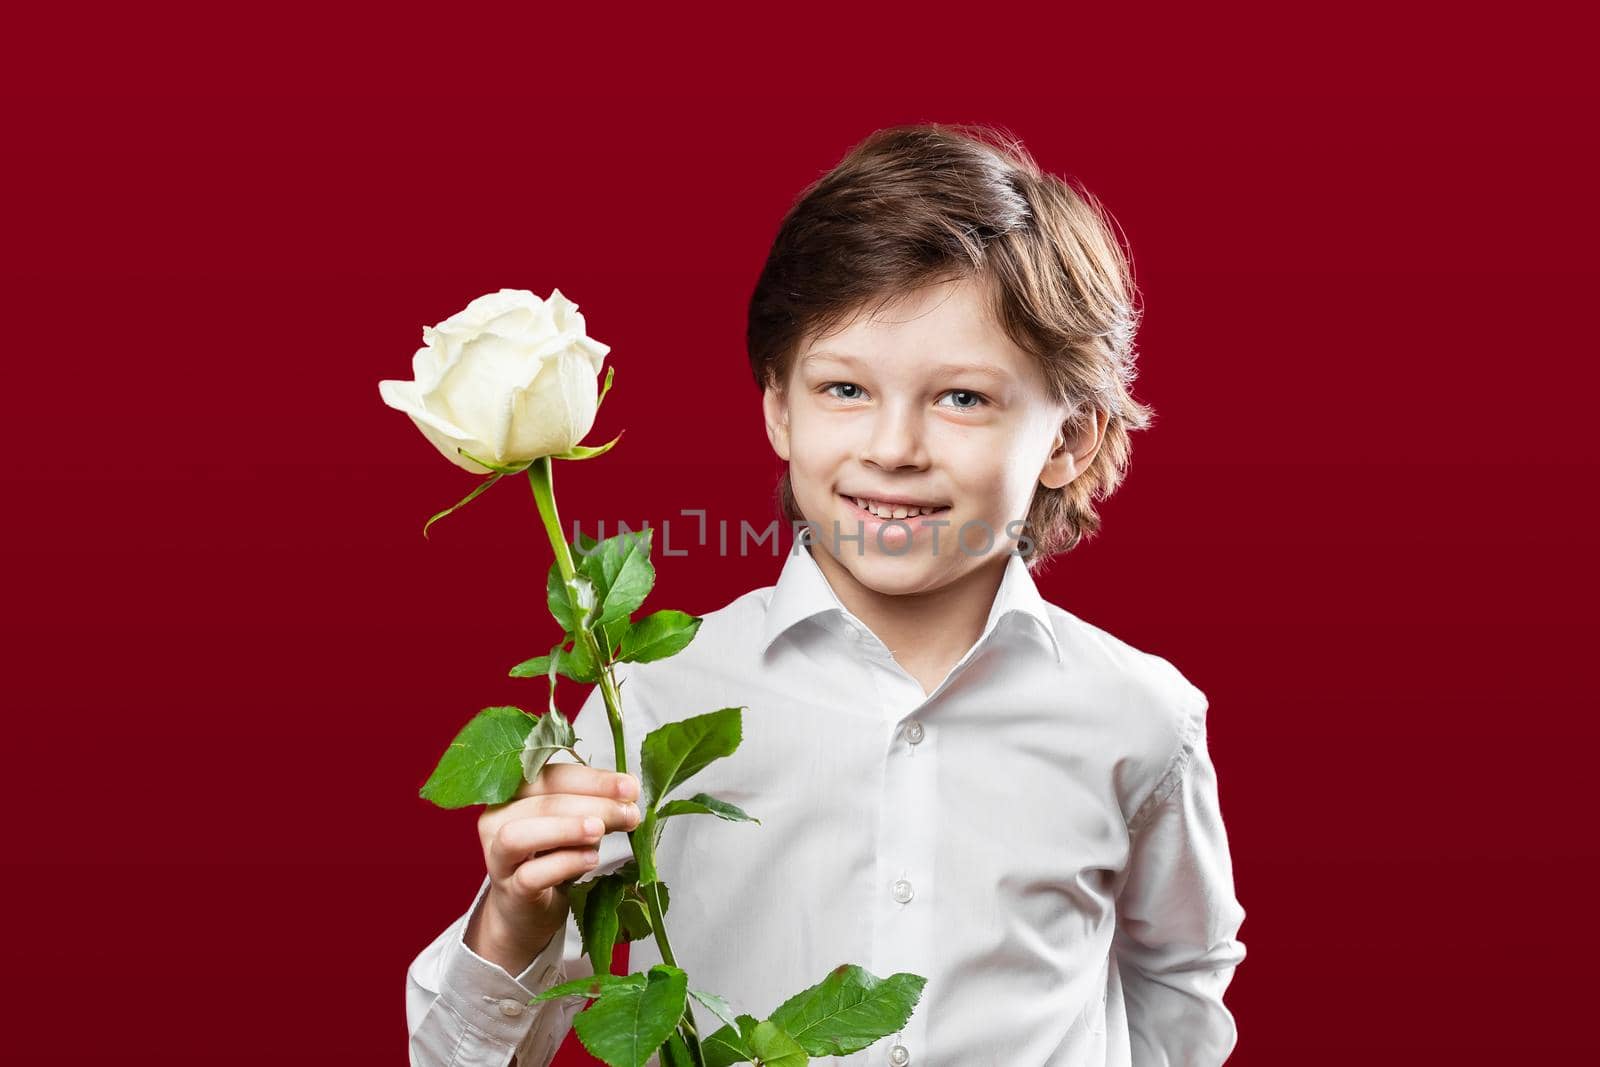 Boy with a rose celebrating St. Valentine’s Day by Syvanych